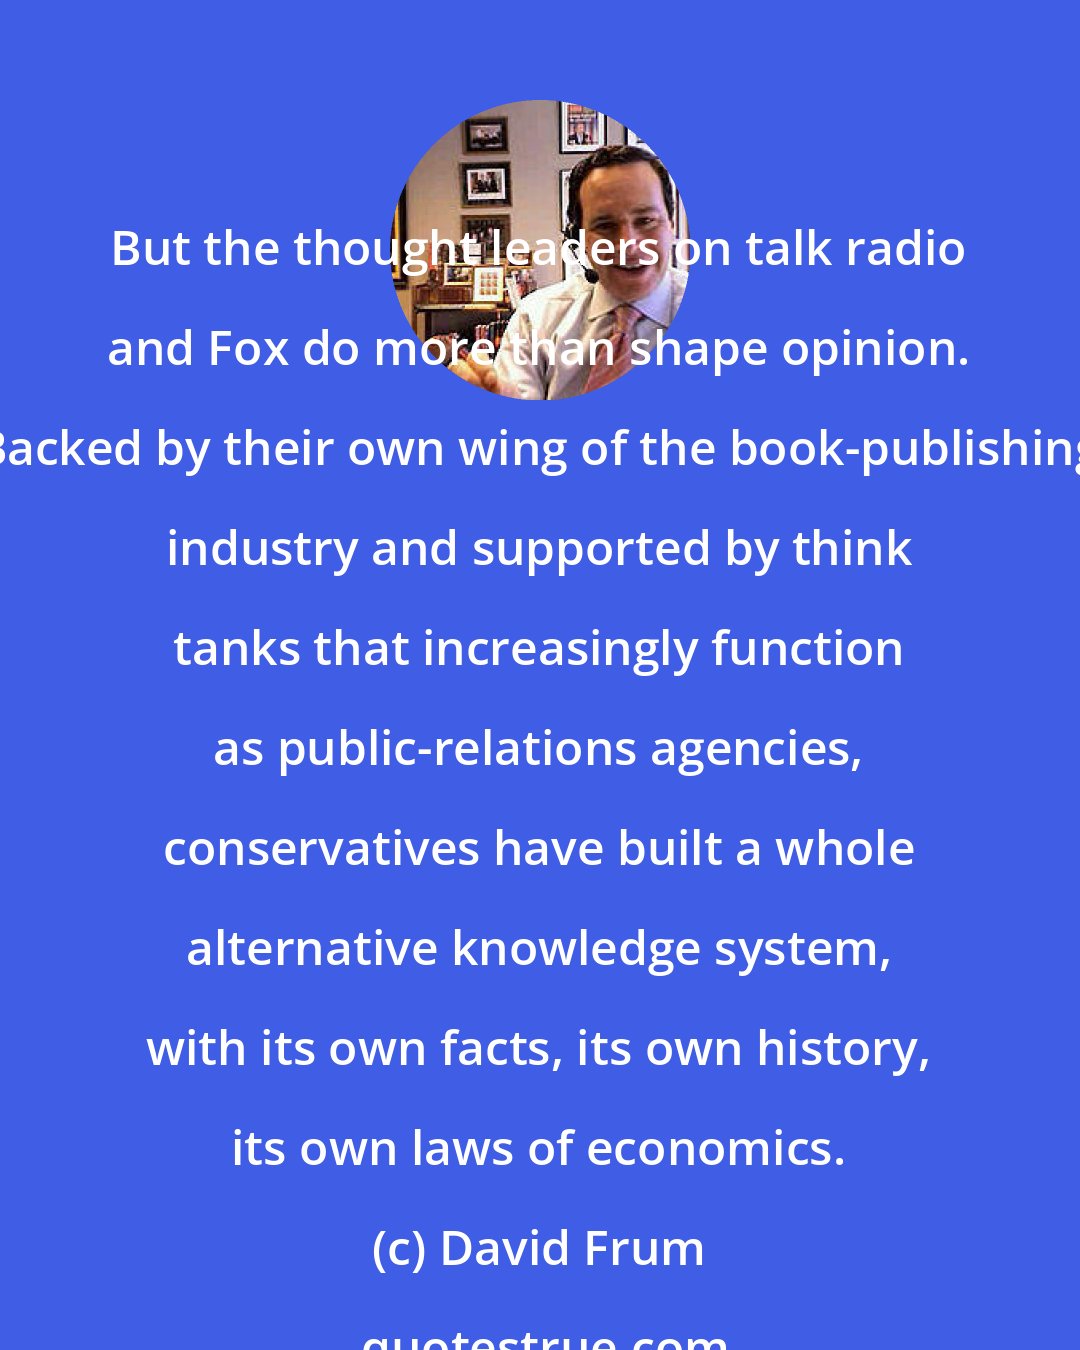 David Frum: But the thought leaders on talk radio and Fox do more than shape opinion. Backed by their own wing of the book-publishing industry and supported by think tanks that increasingly function as public-relations agencies, conservatives have built a whole alternative knowledge system, with its own facts, its own history, its own laws of economics.